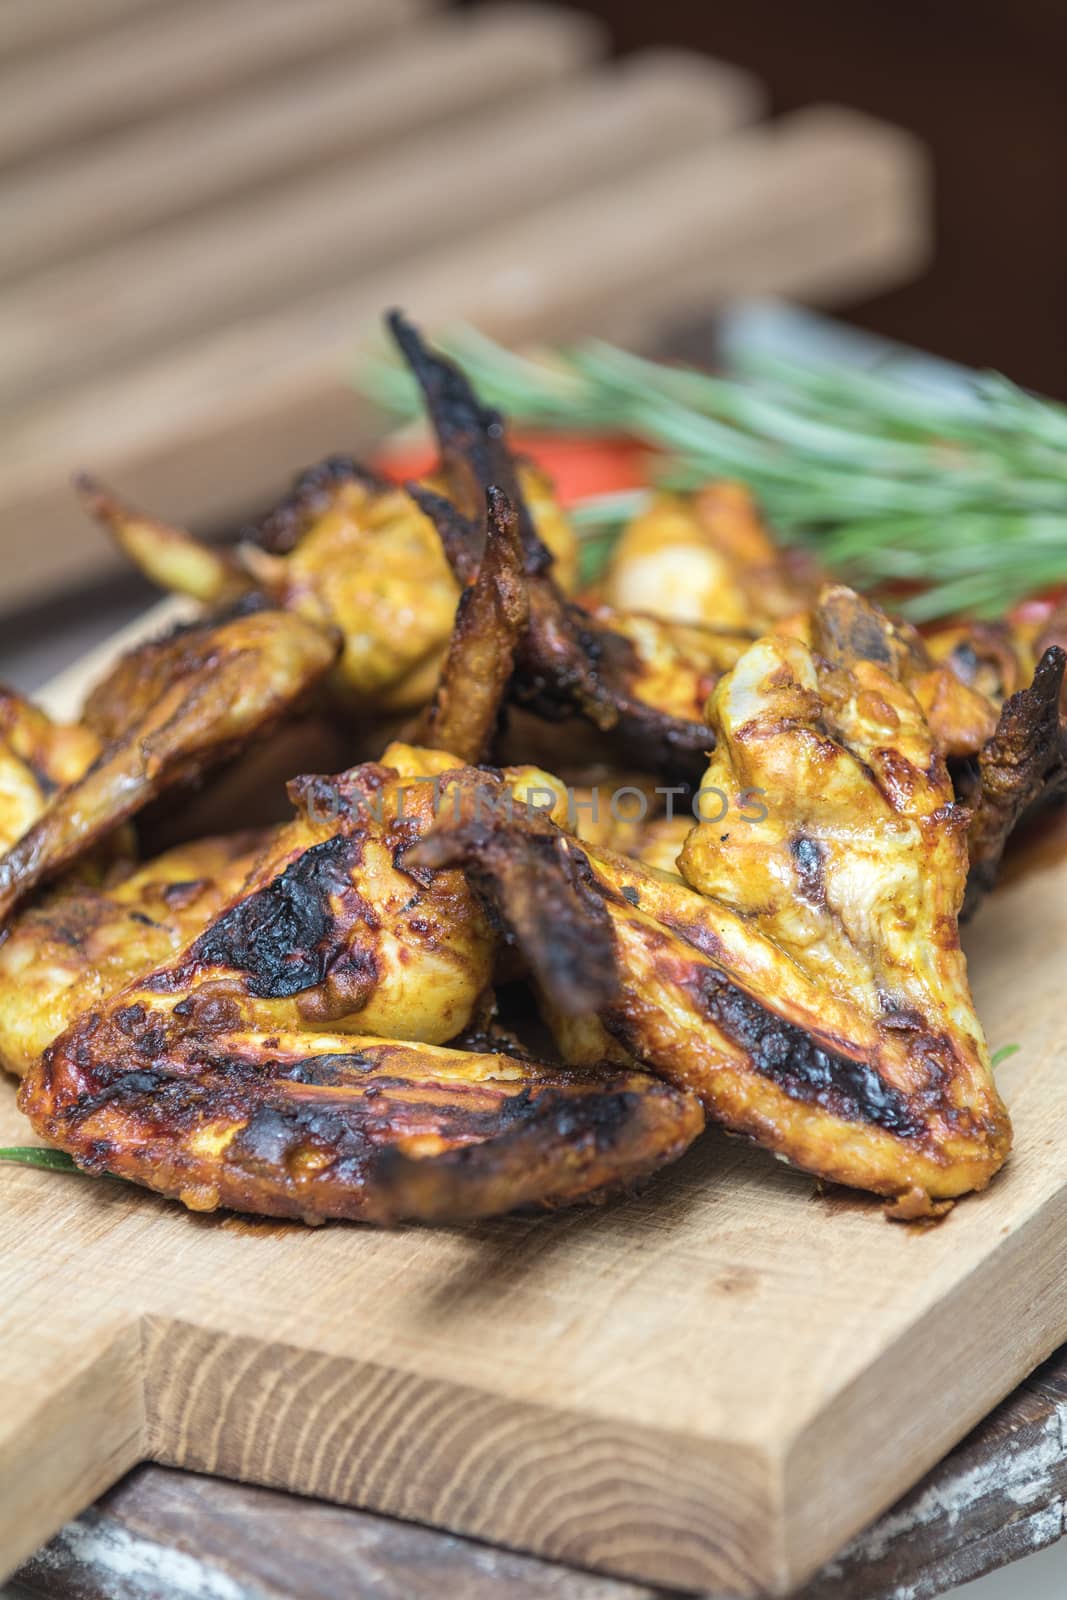 Pile of roasted grilled chicken wings on oak wooden board. Fresh vegetables and greens on the background. Fresh grilled chicken meat. Shallow depth of field.